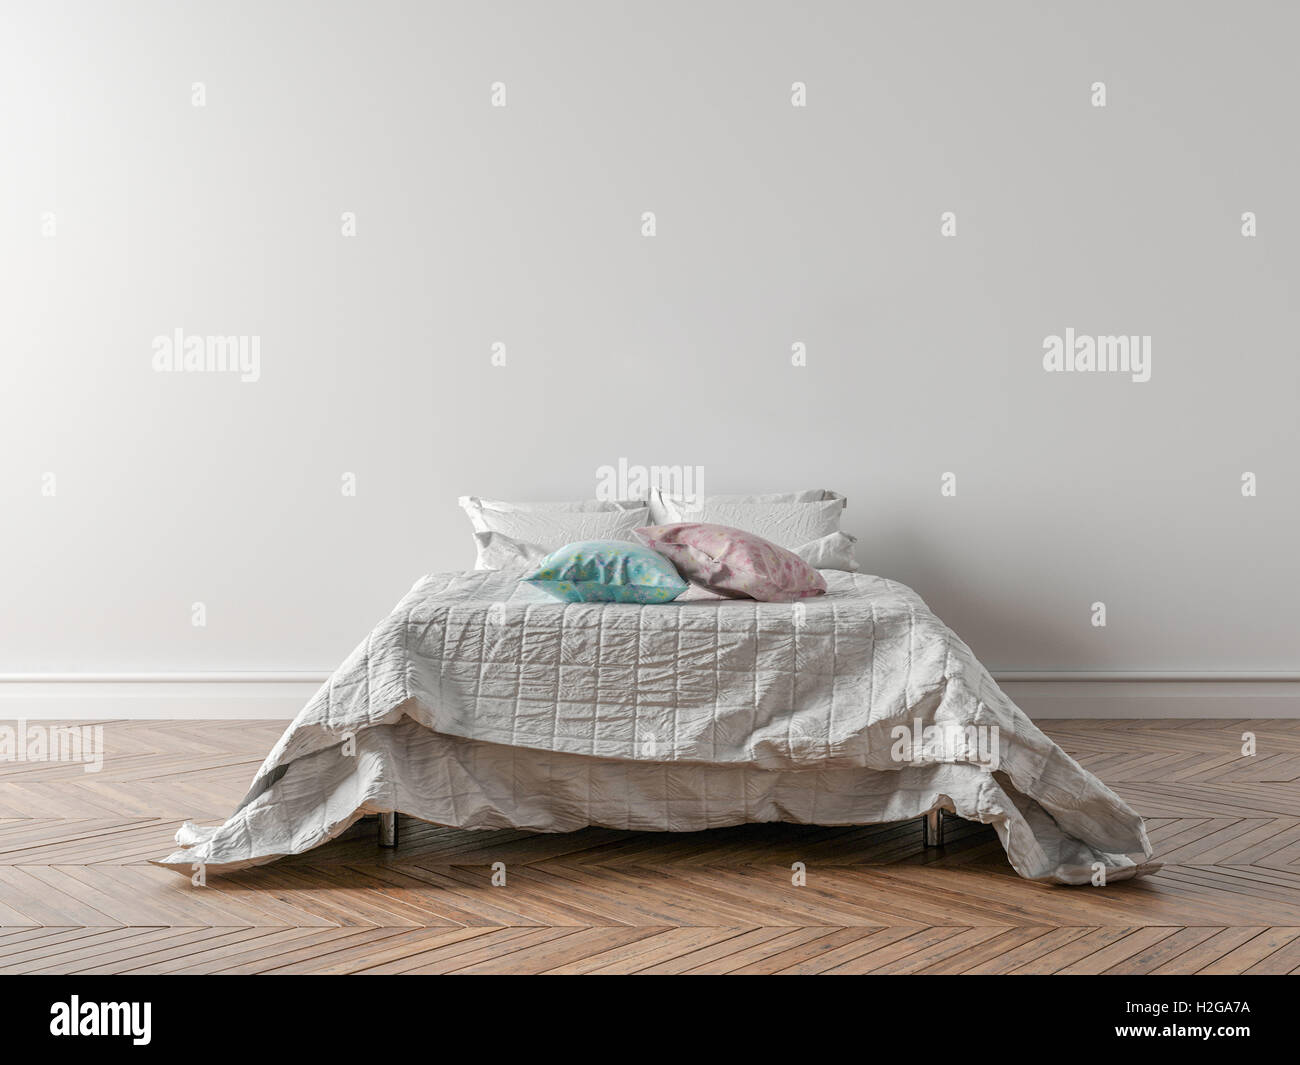 https://c8.alamy.com/comp/H2GA7A/empty-bedroom-with-a-king-size-bed-and-a-white-wall-in-the-background-H2GA7A.jpg